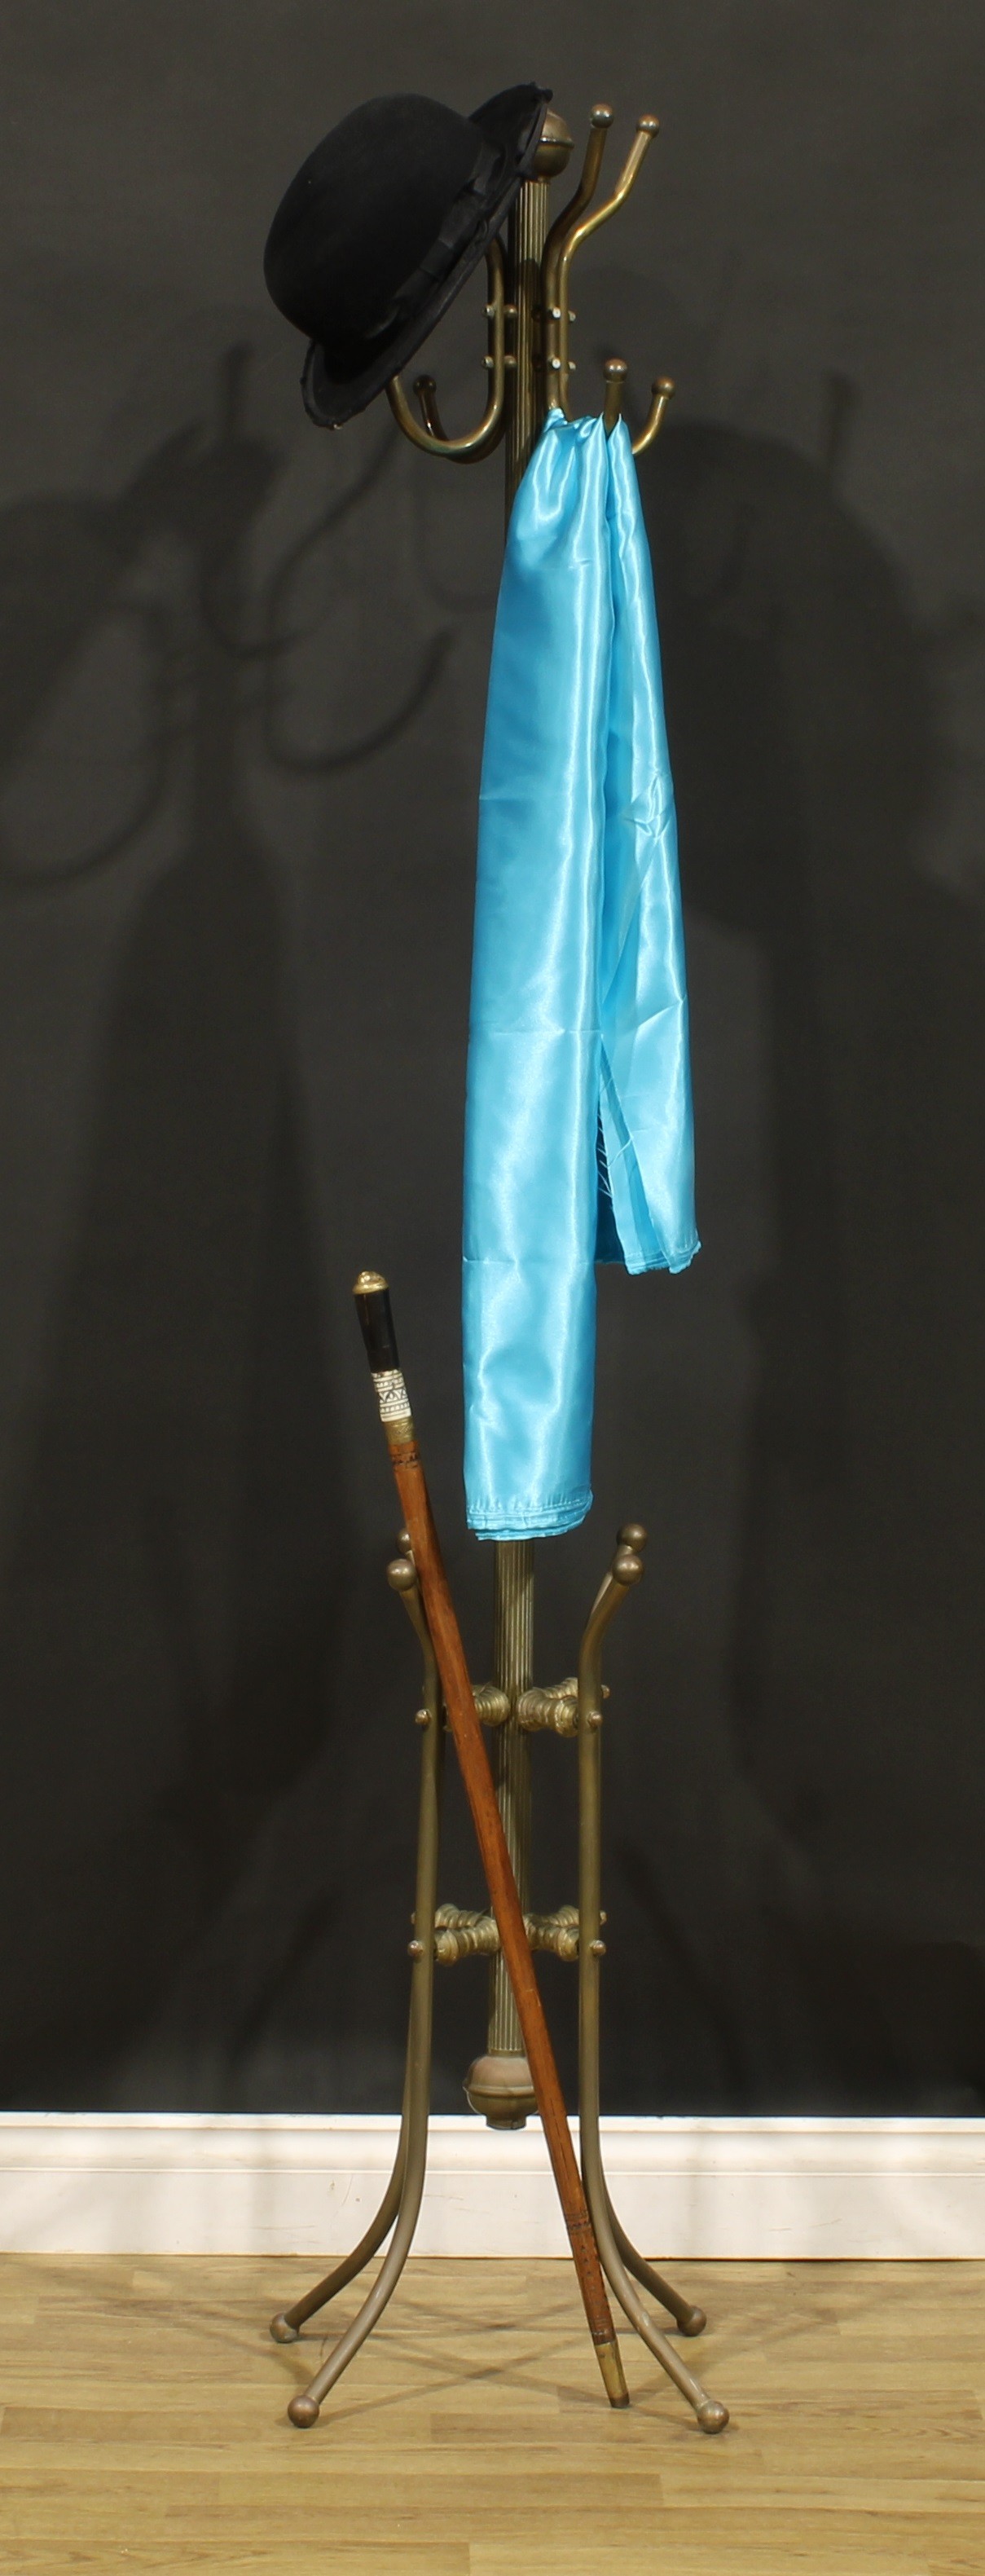 An early 20th century brass coat and hat stand, possibly American, in the Aesthetic Movement